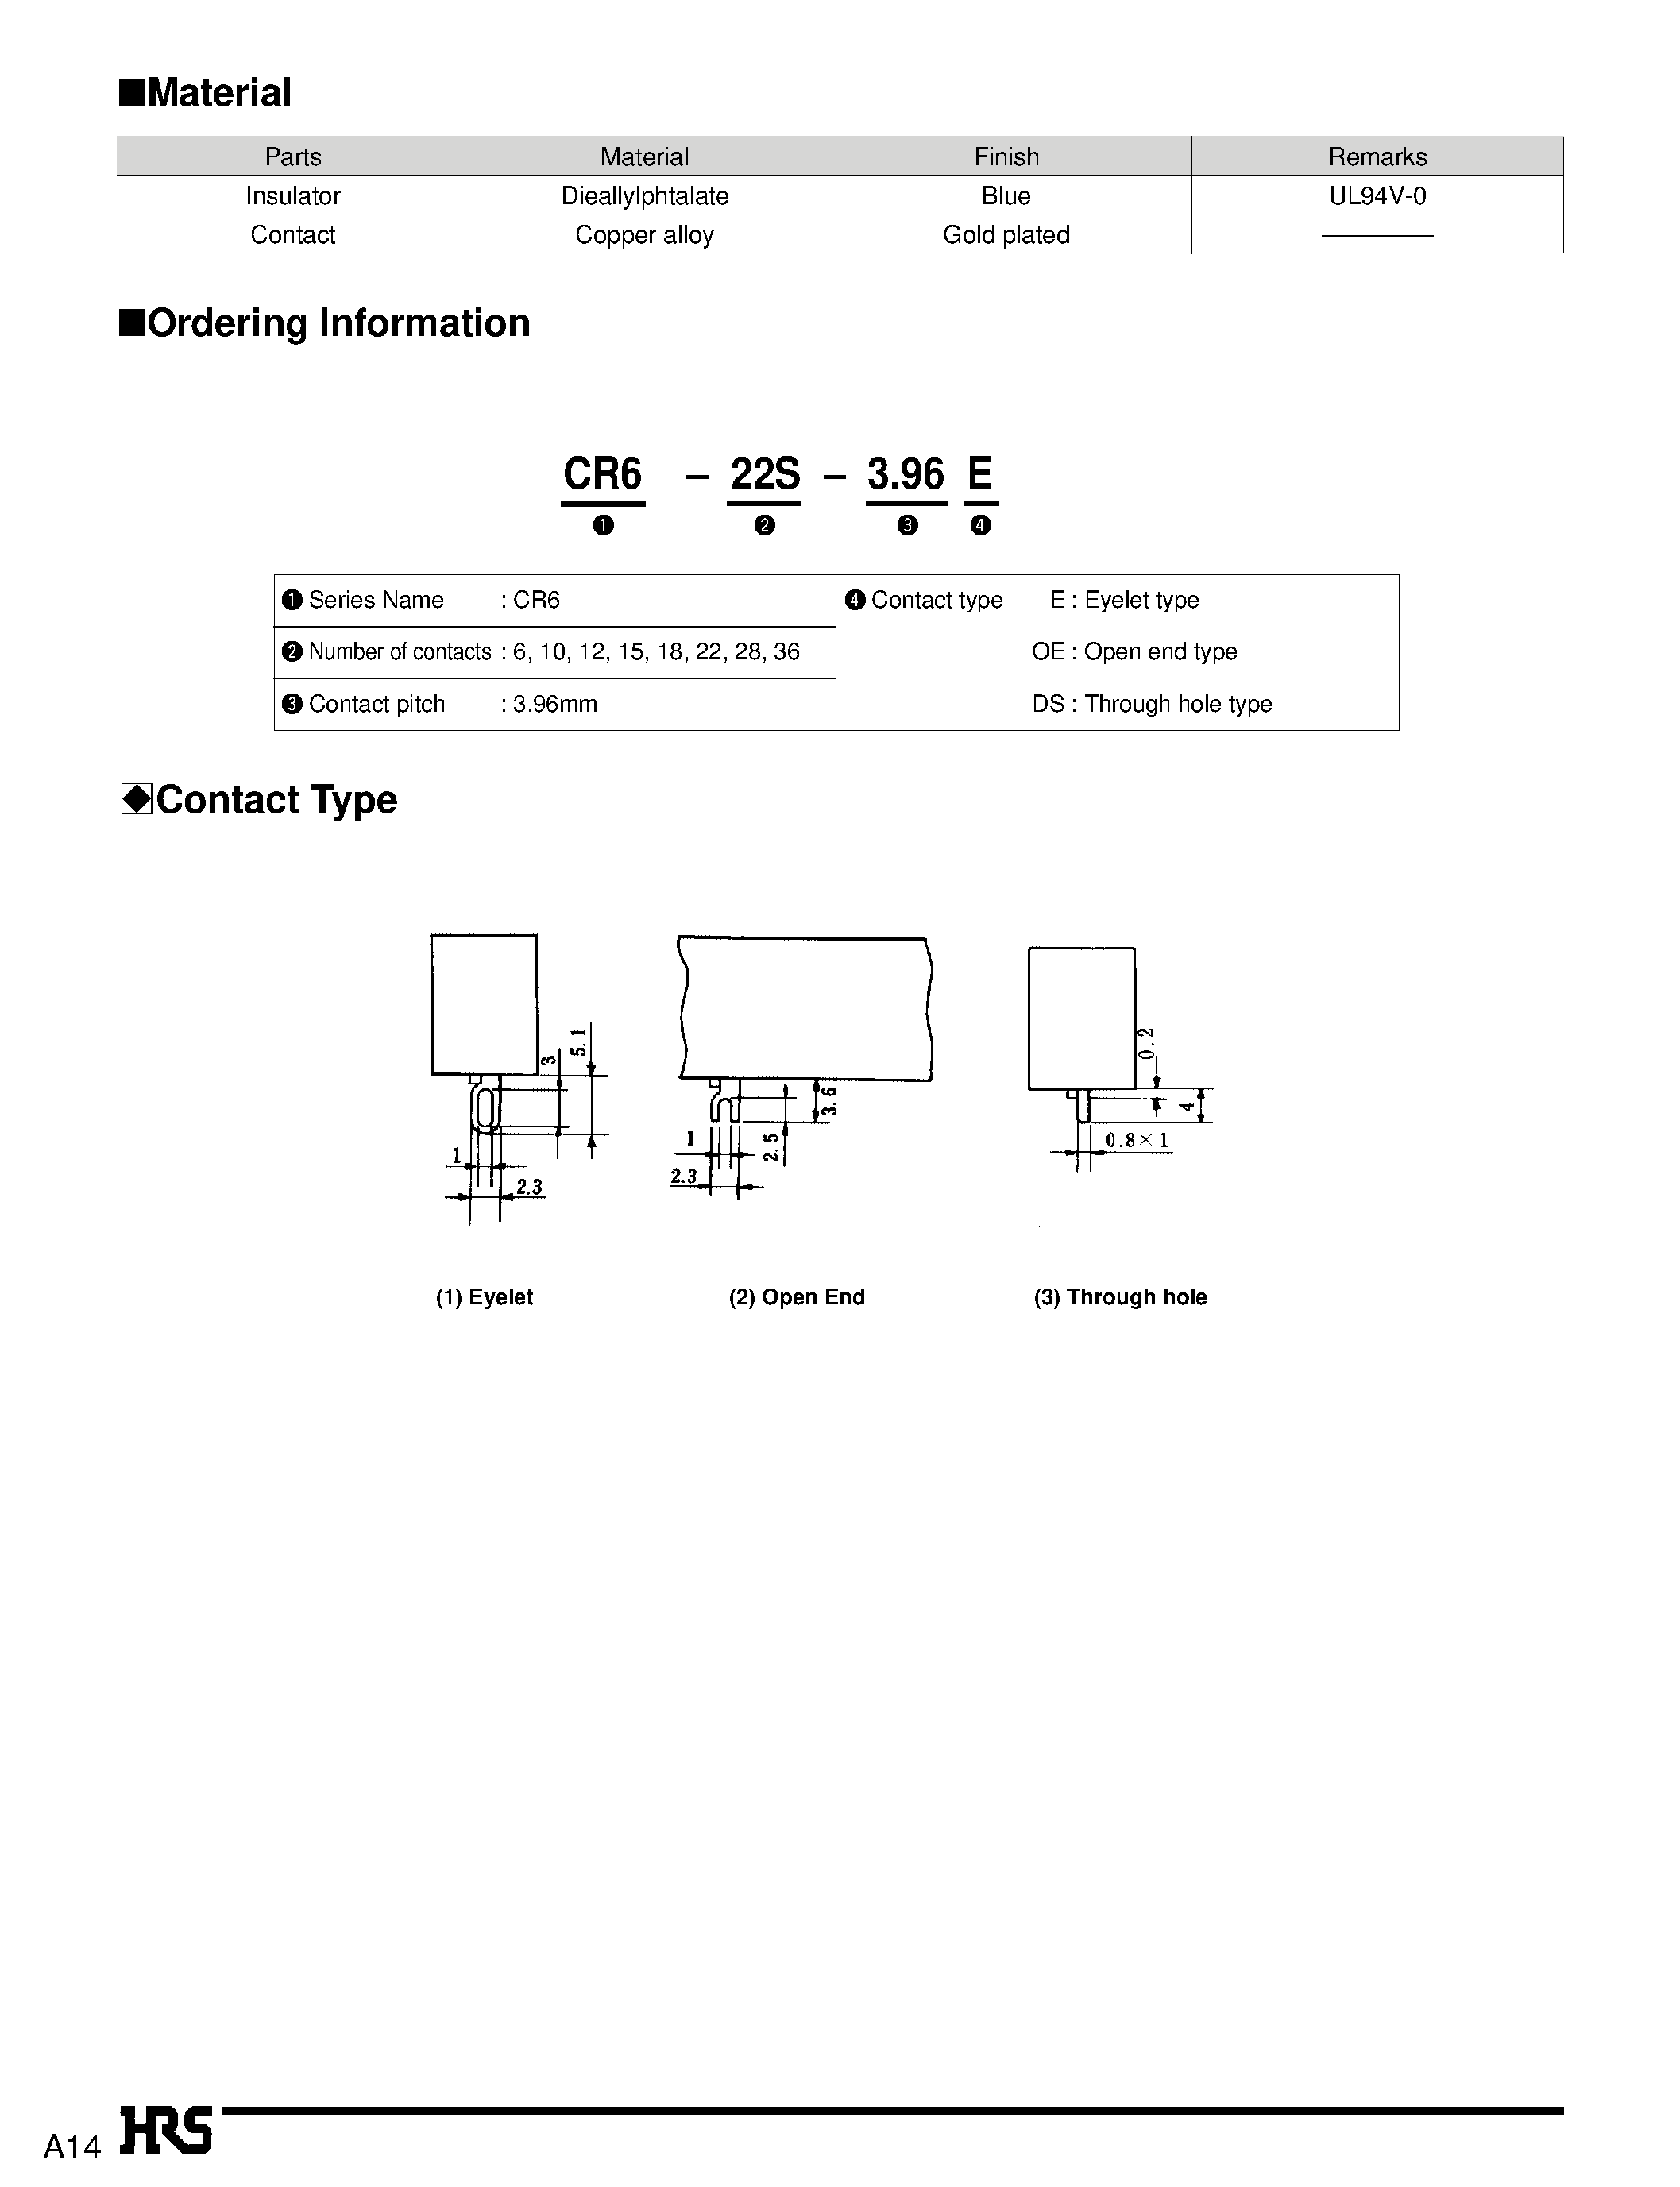 Datasheet CR6-22S-3.96OE - 3.96mm Pitch Card Edge Connector page 2